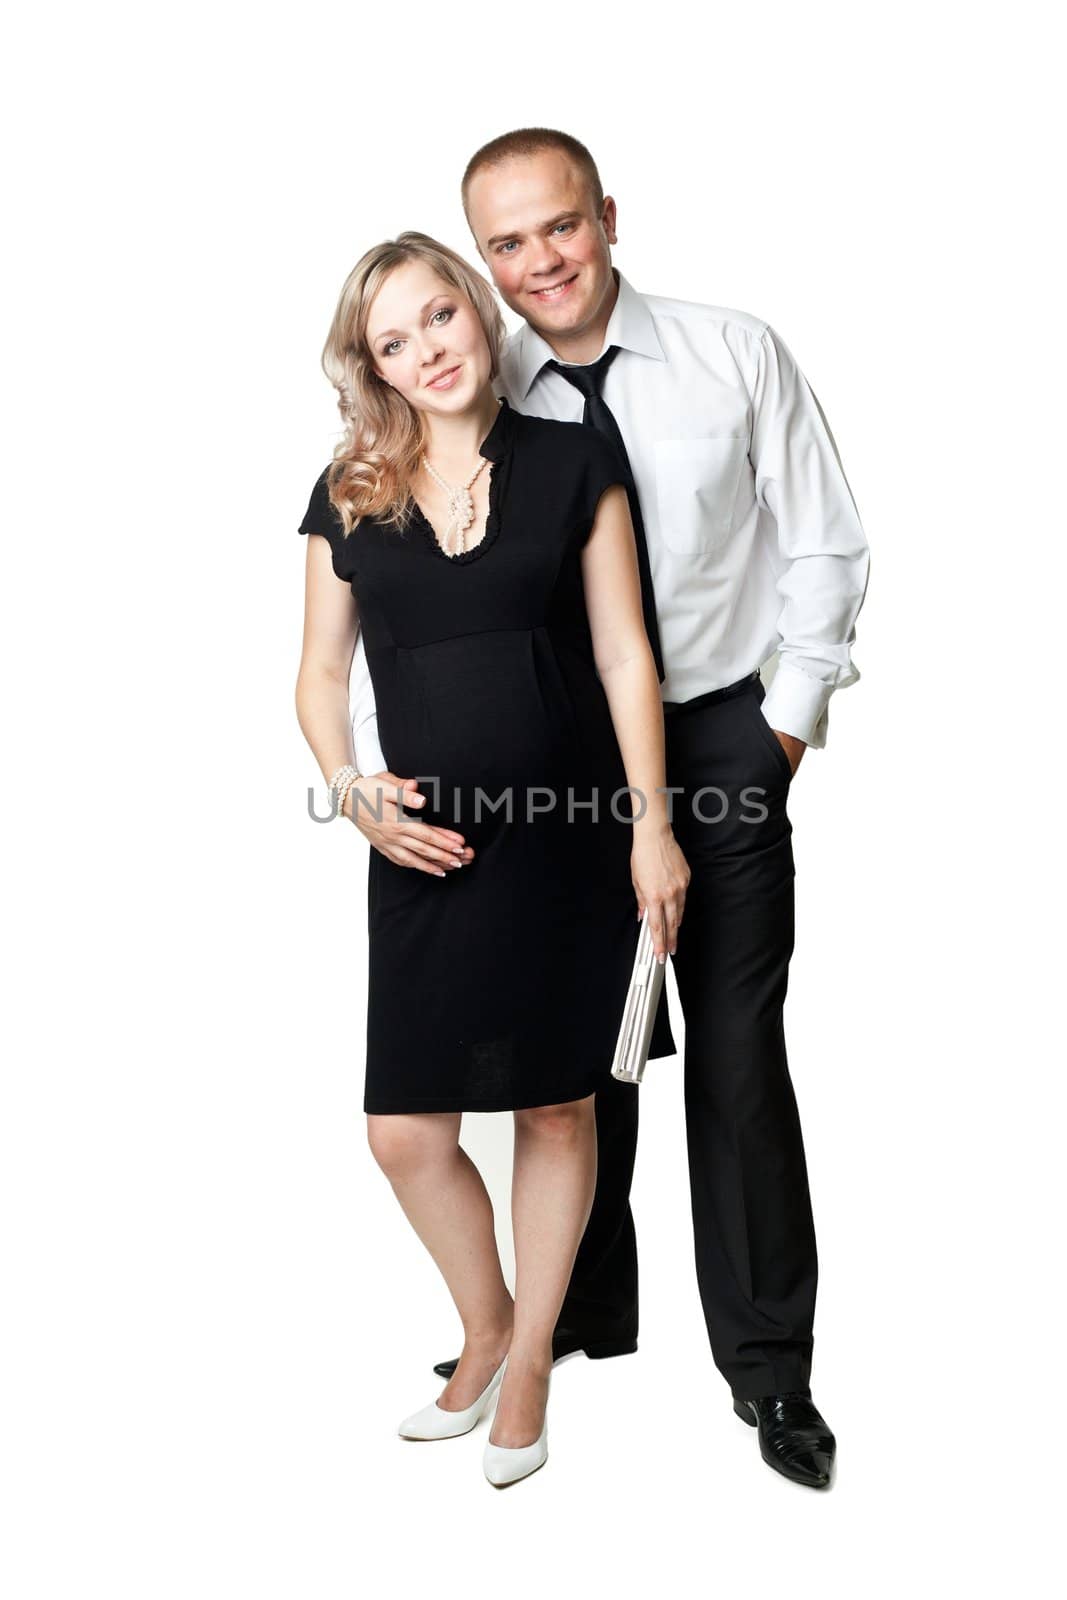 An image of a young pregnant woman and her husband